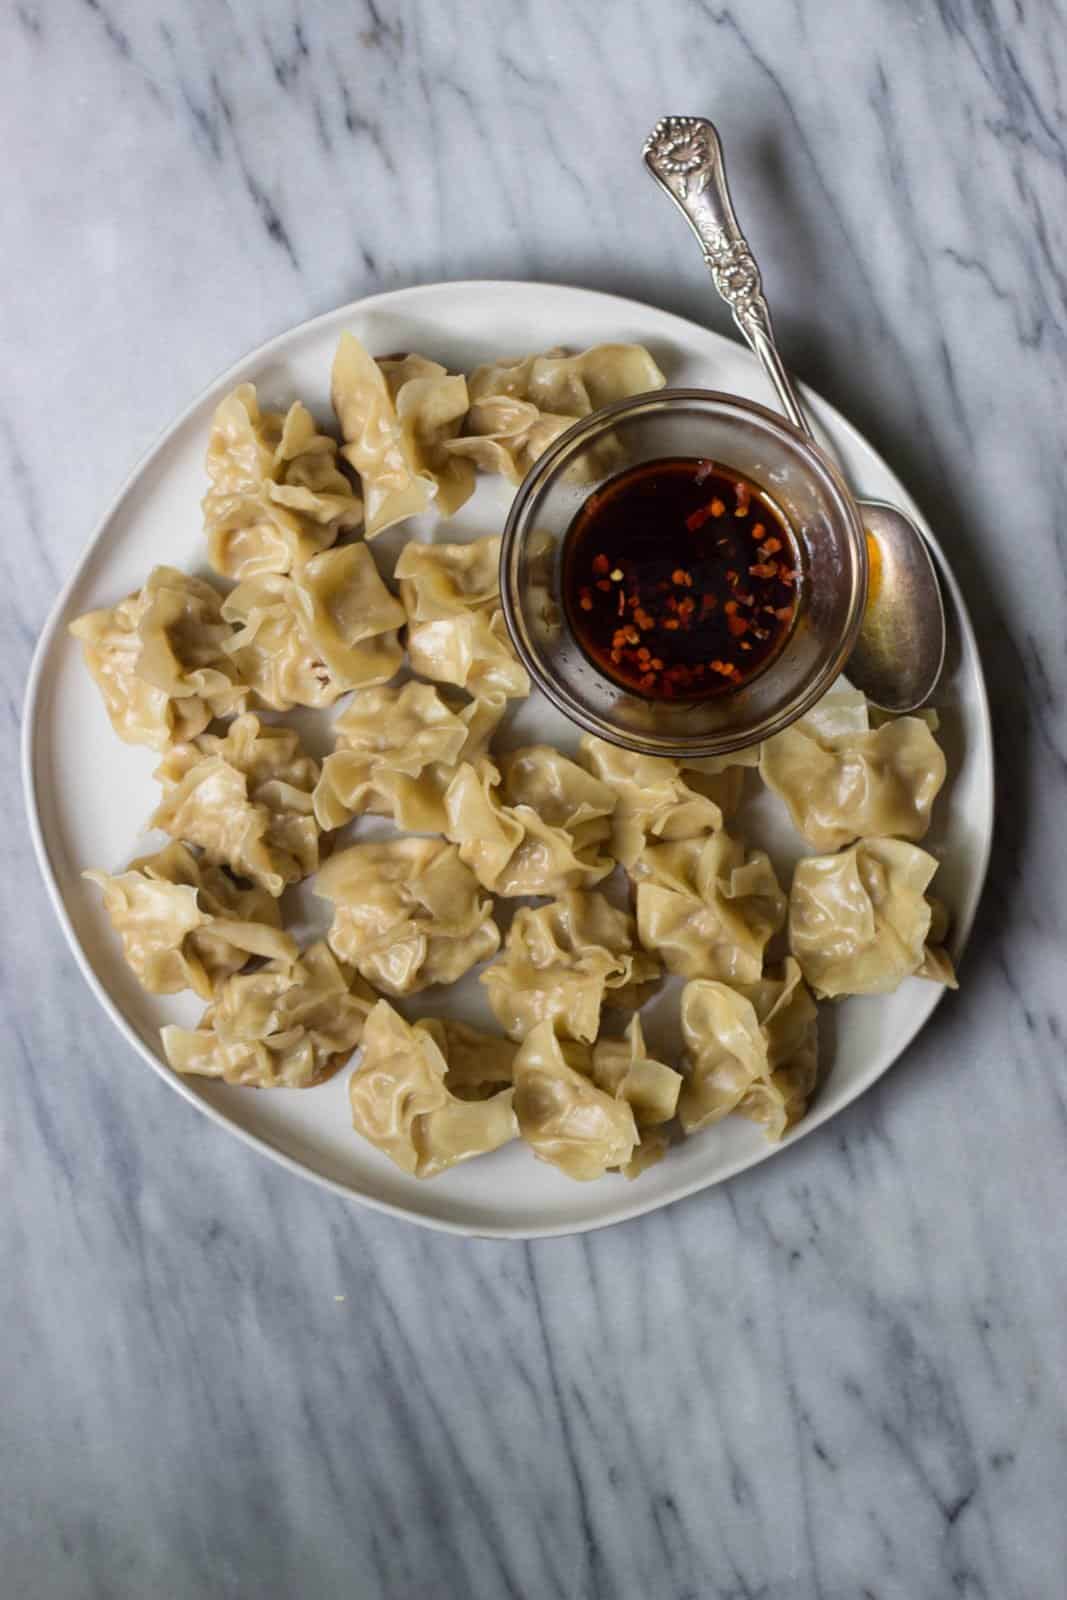 Homemade Chinese Pork Dumplings with Chili Oil Dipping Sauce